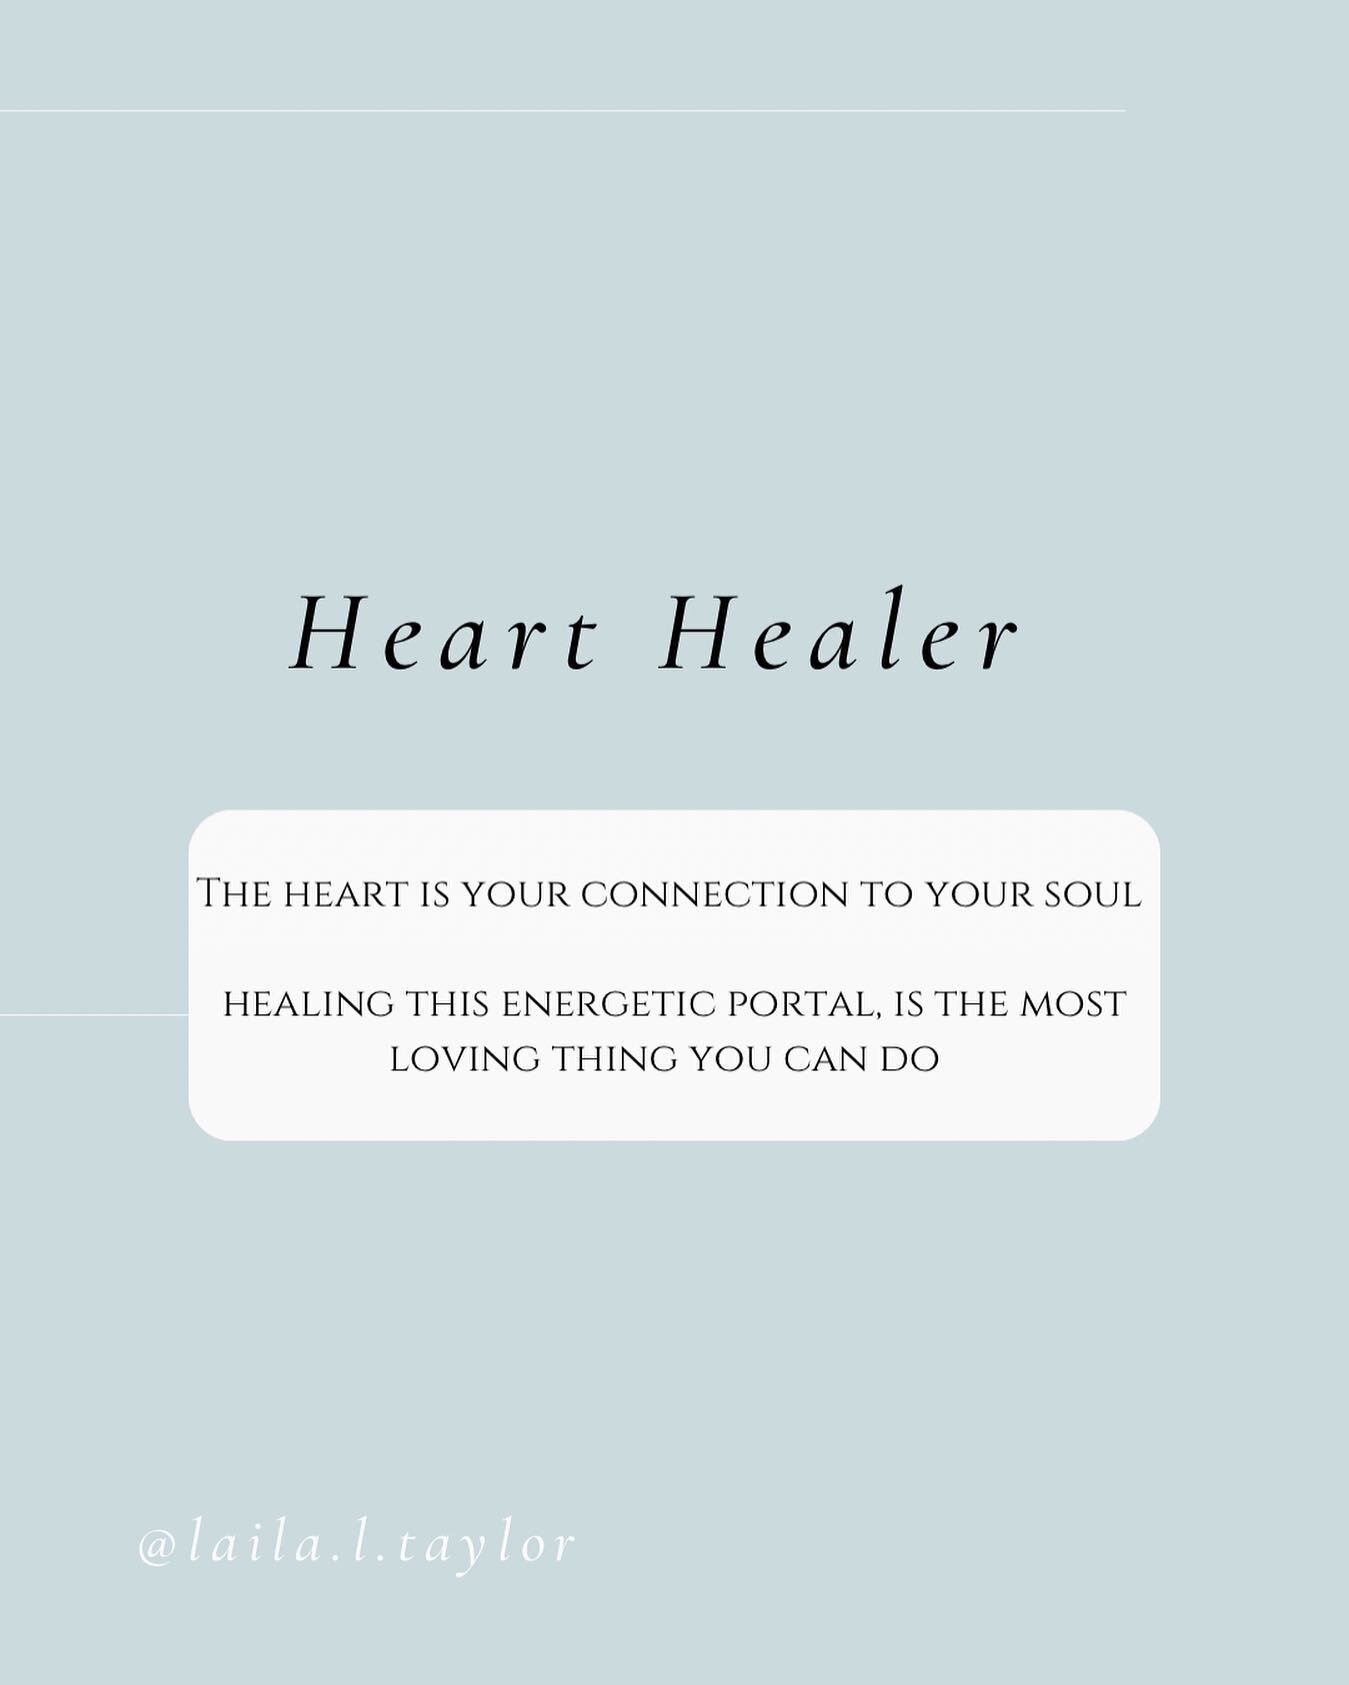 MOVE into your ❤️, if you want to HEAL

- there is so much focus on the third eye with awakening and spirituality, but I have found the ❤️chakra to be the most powerful transformer of energy. 

With a blocked heart chakra and an open third eye, you c